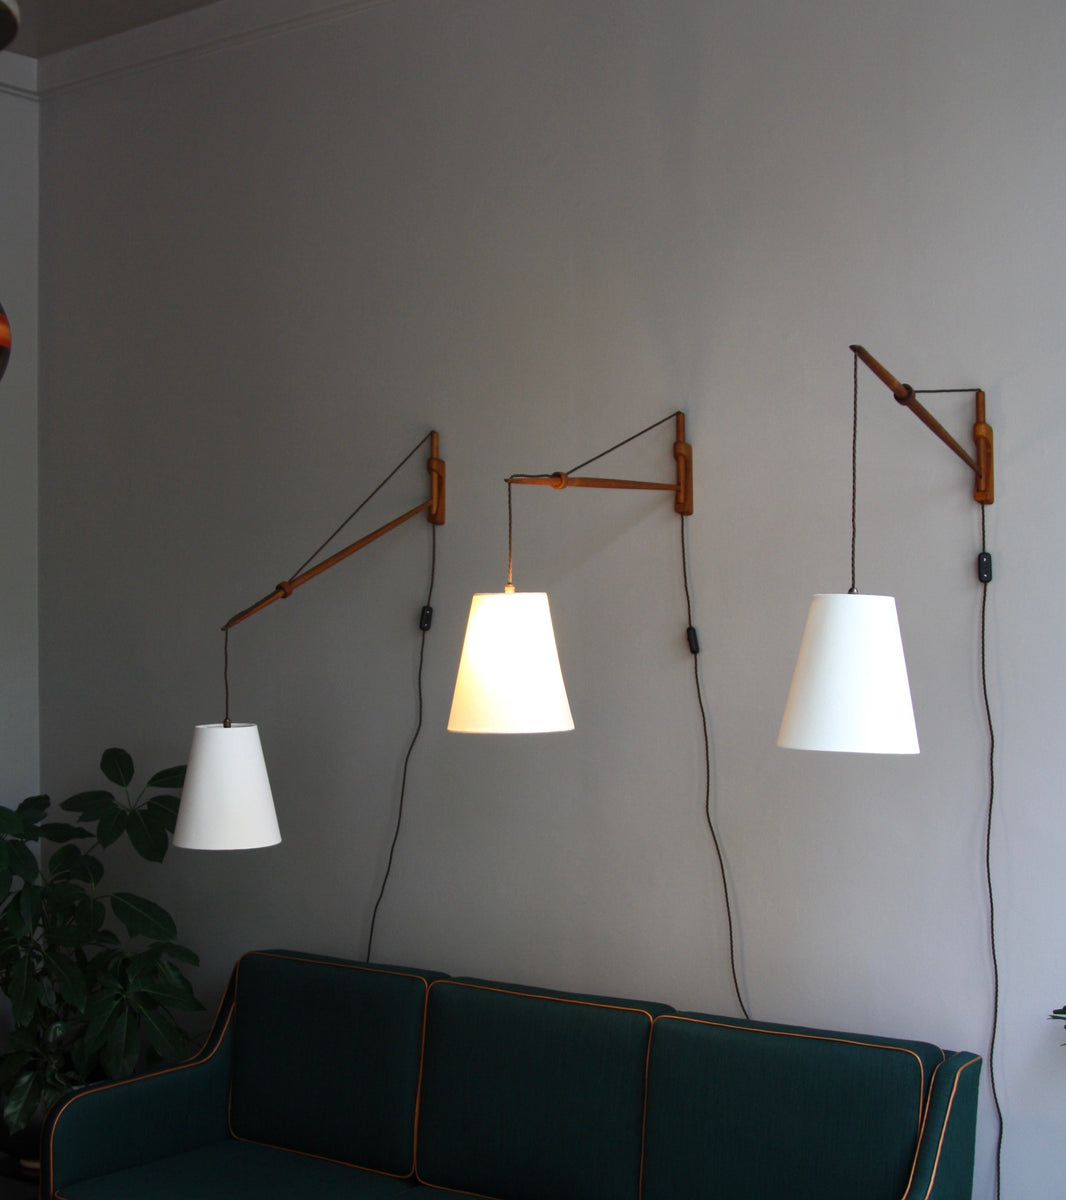 Articulated Arc Wall Lamps / Lisa Johansson-Pape, 1954